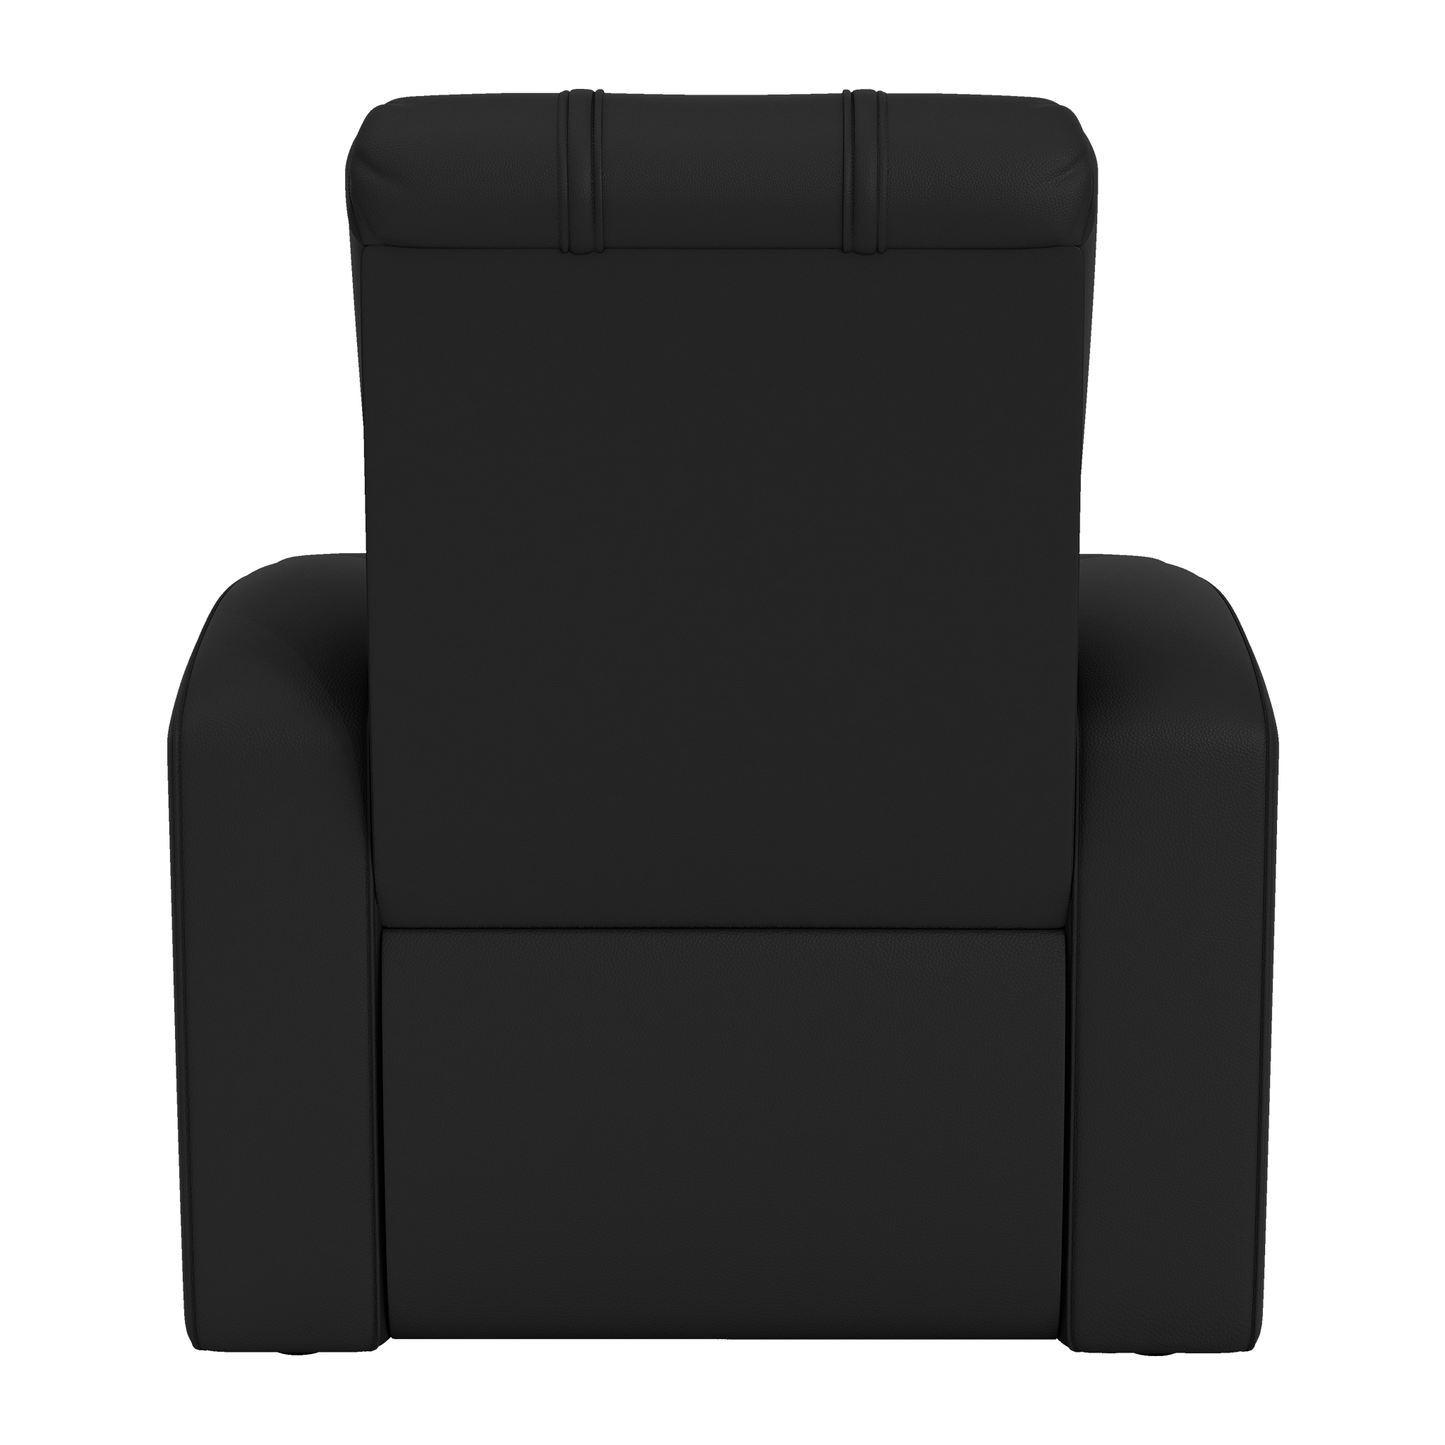 Relax Home Theater Recliner Heat Check Gaming Secondary